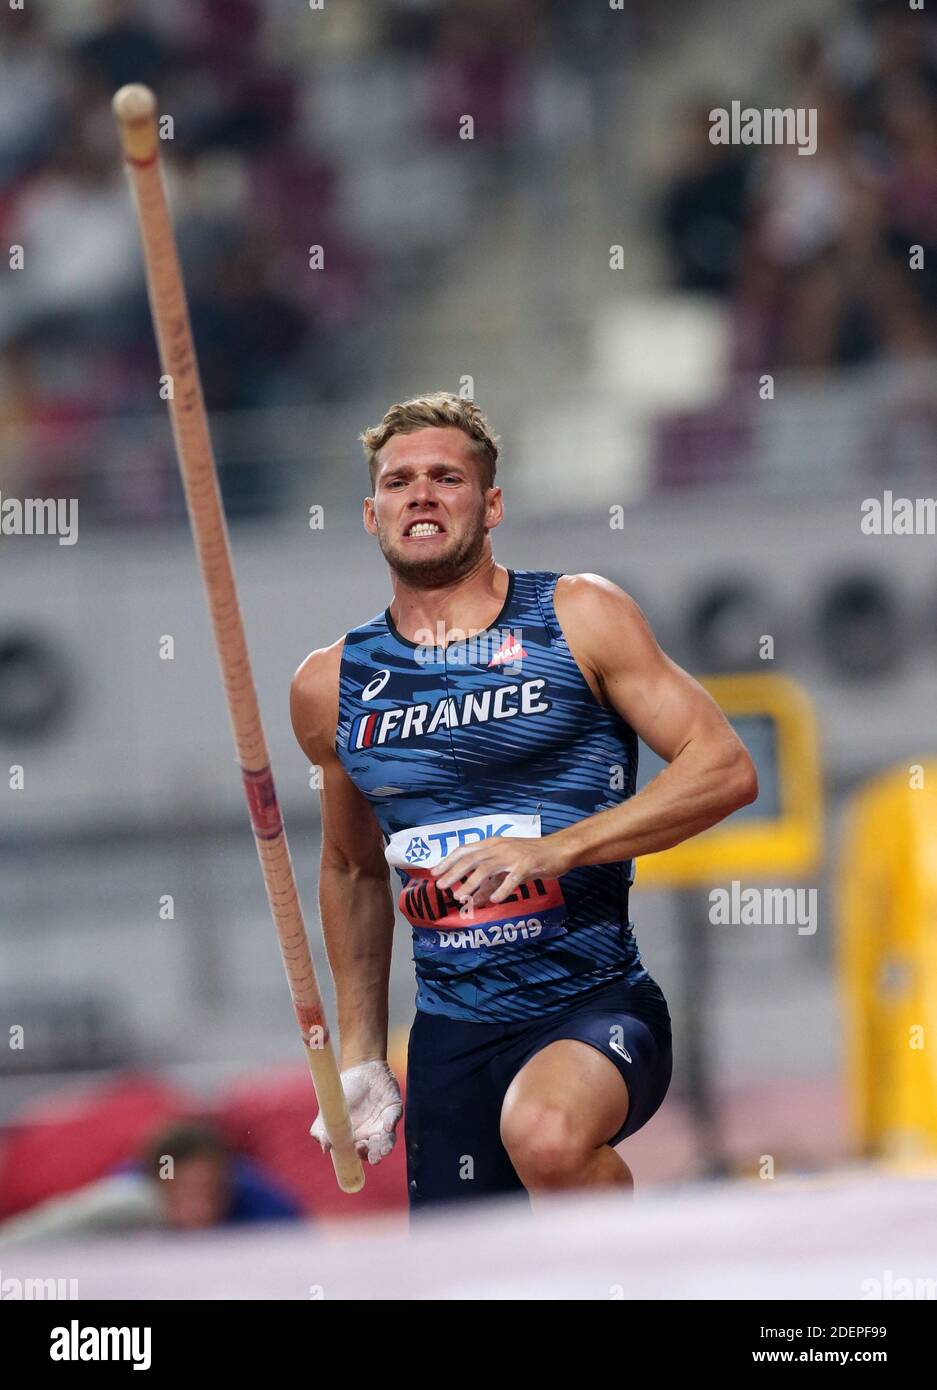 Kevin Mayer competes on Decathlon during the IAAF World Athletics  Championships at Khalifa Stadium in Doha, Qatar, on October 3, 2019. Kevin  Mayer, the defending champion in the men's decathlon, pulled out